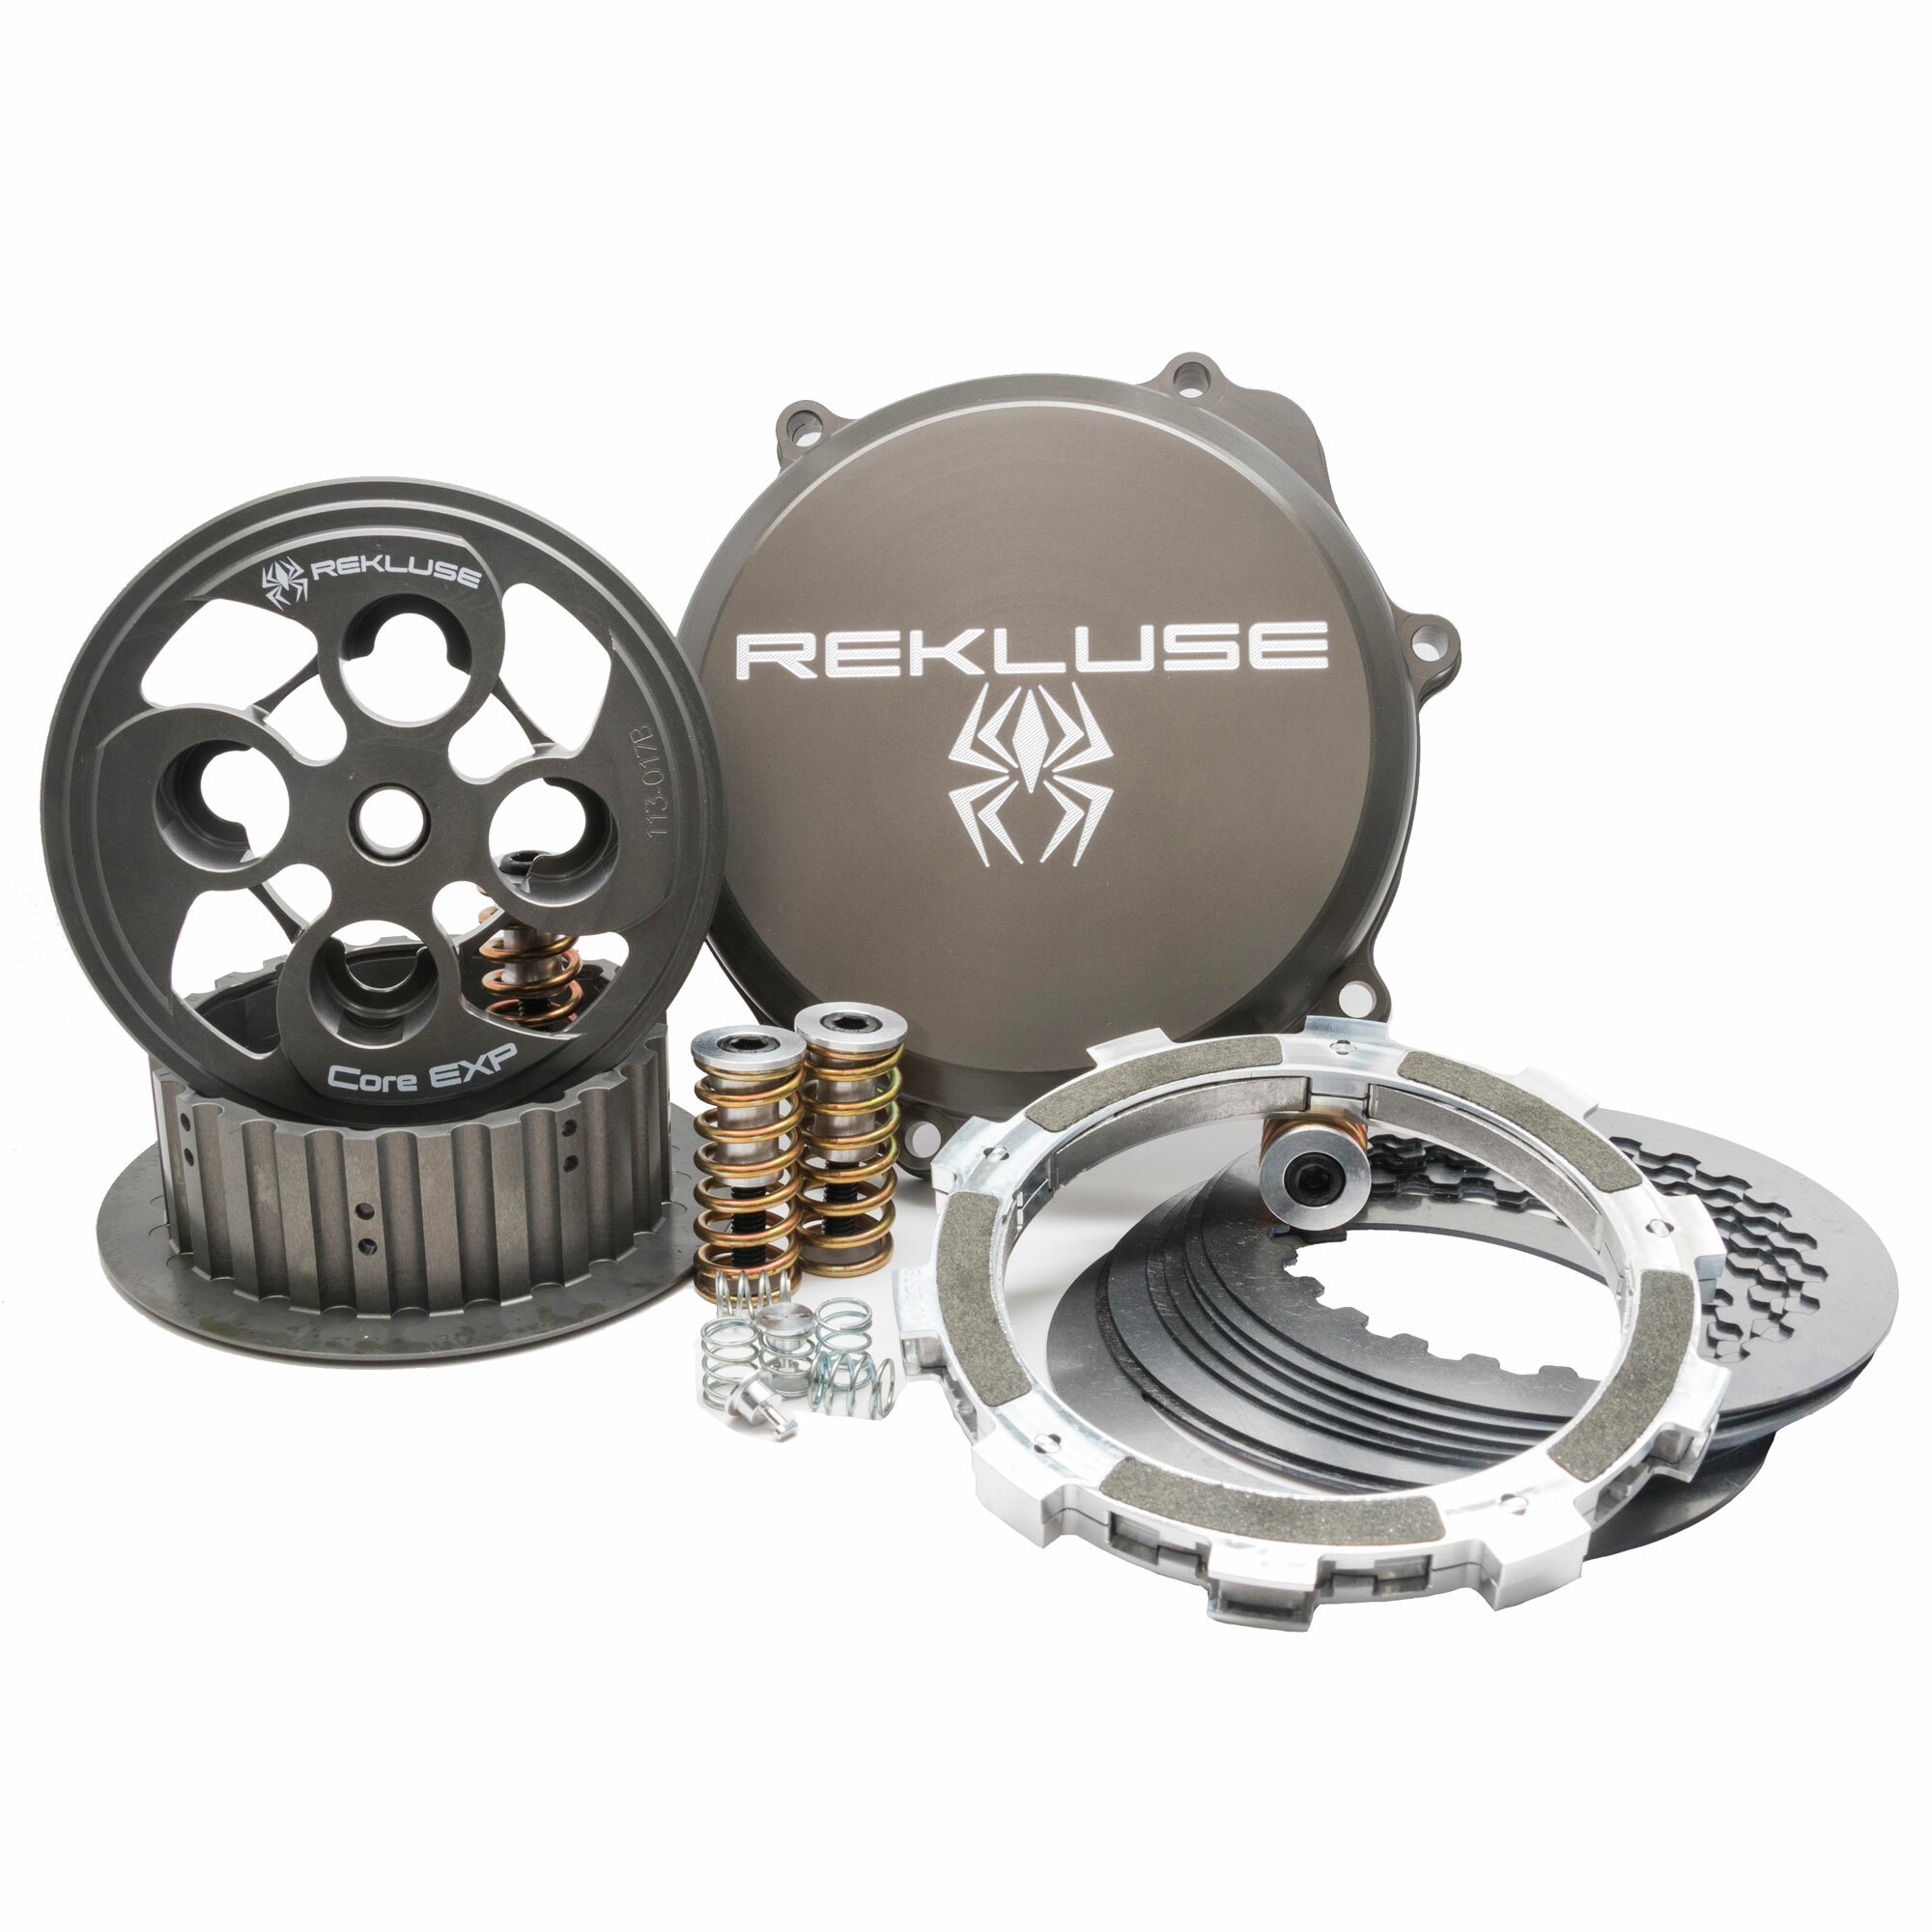 Rekluse Racing - Core Exp 3.0 Clutch Yam - RMS-7772